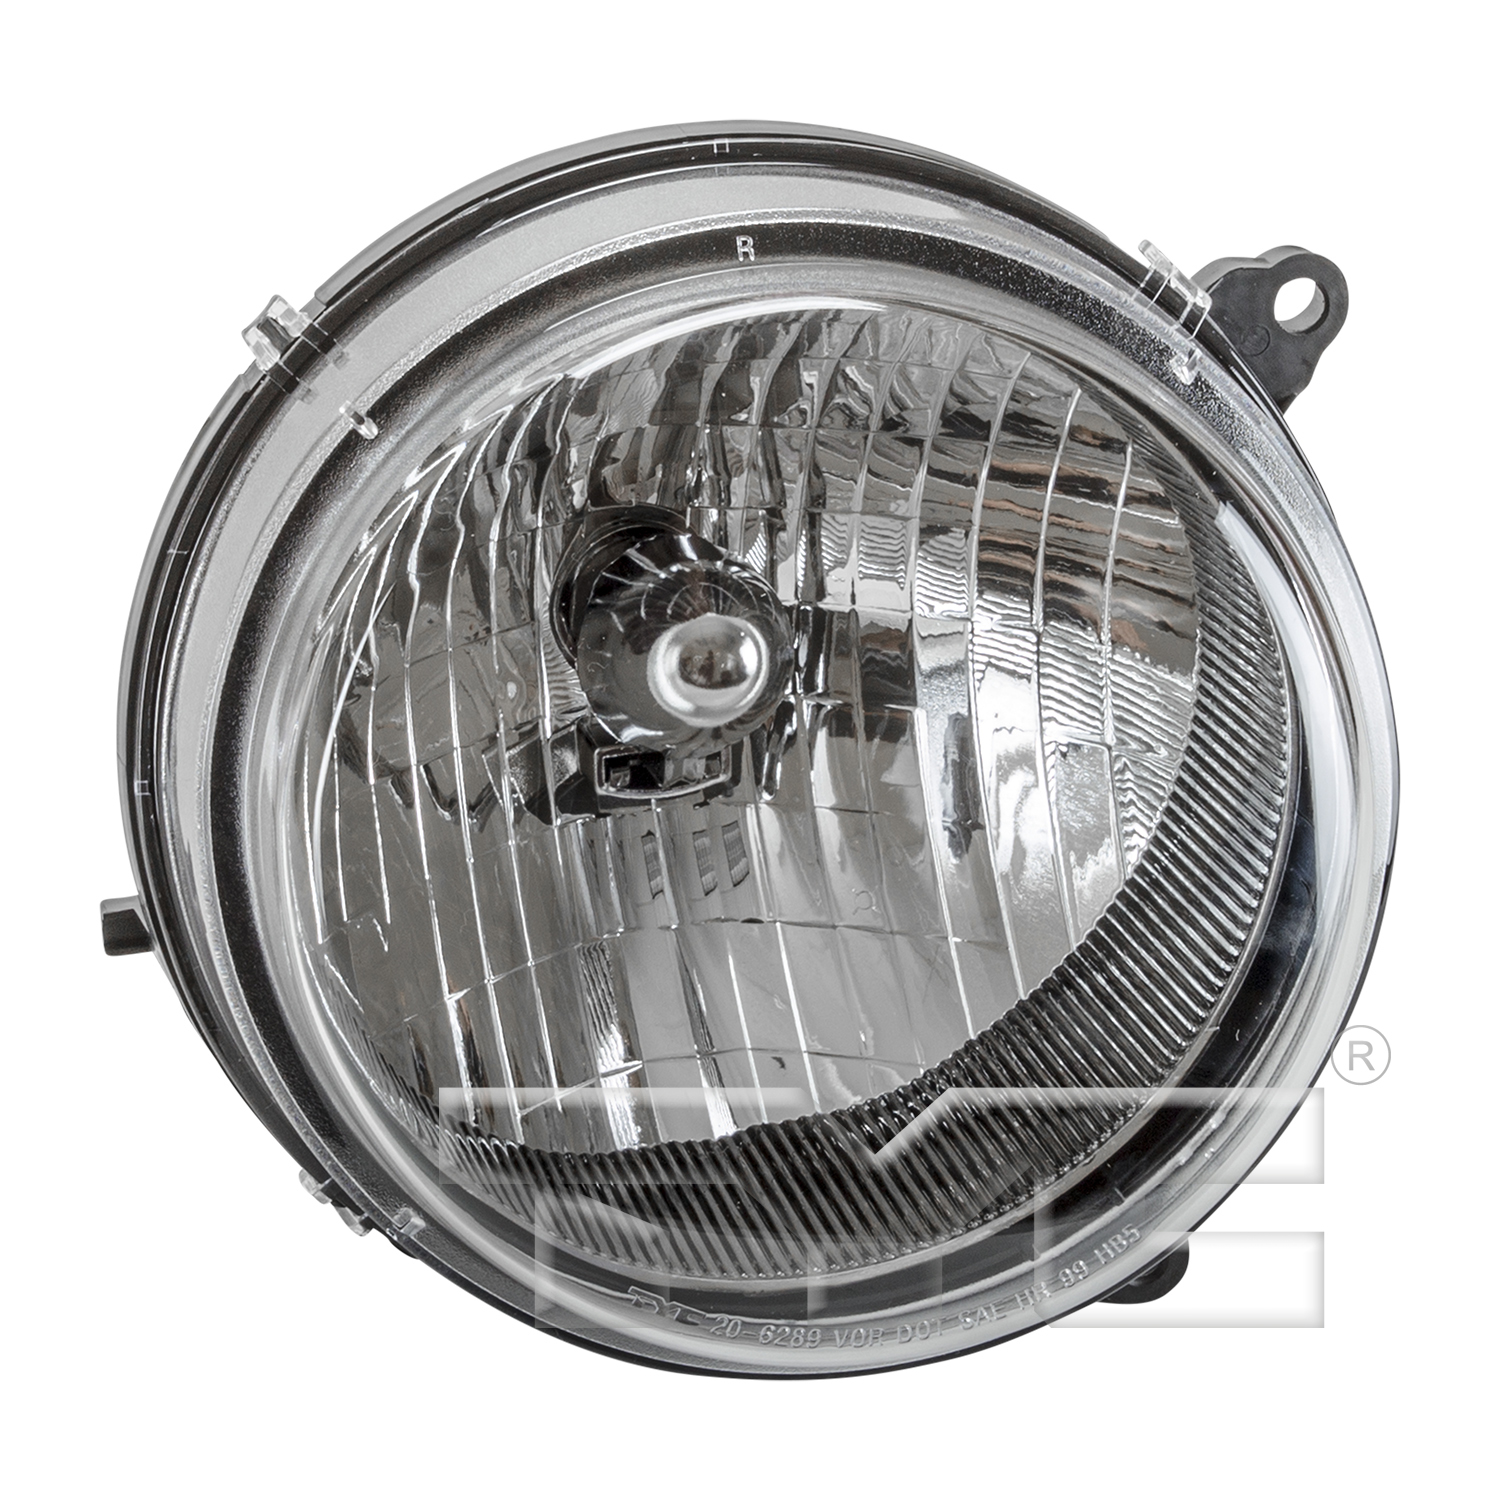 Aftermarket HEADLIGHTS for JEEP - LIBERTY, LIBERTY,03-04,RT Headlamp assy composite